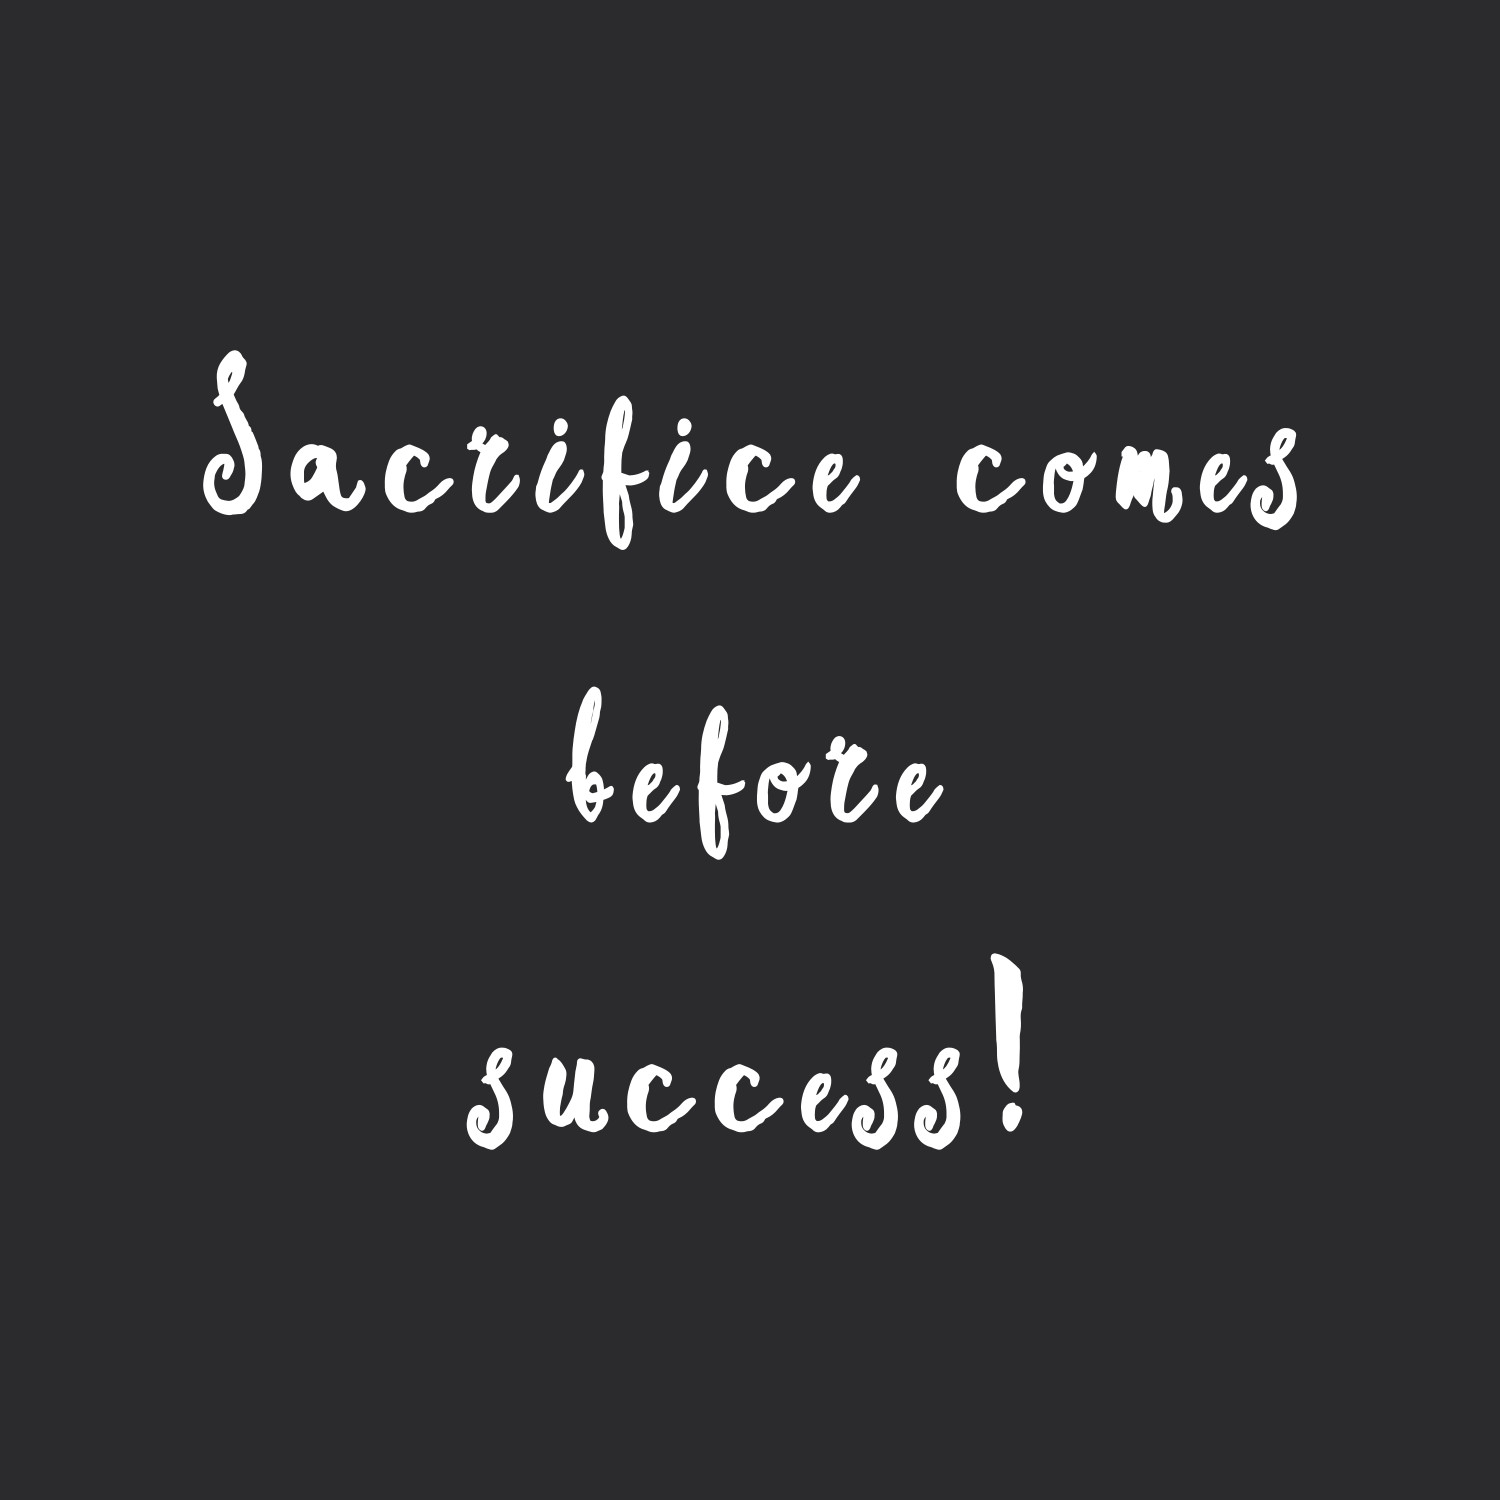 Sacrifice before success! Browse our collection of motivational exercise and healthy eating quotes and get instant weight loss and fitness inspiration. Stay focused and get fit, healthy and happy! https://www.spotebi.com/workout-motivation/sacrifice-before-success/